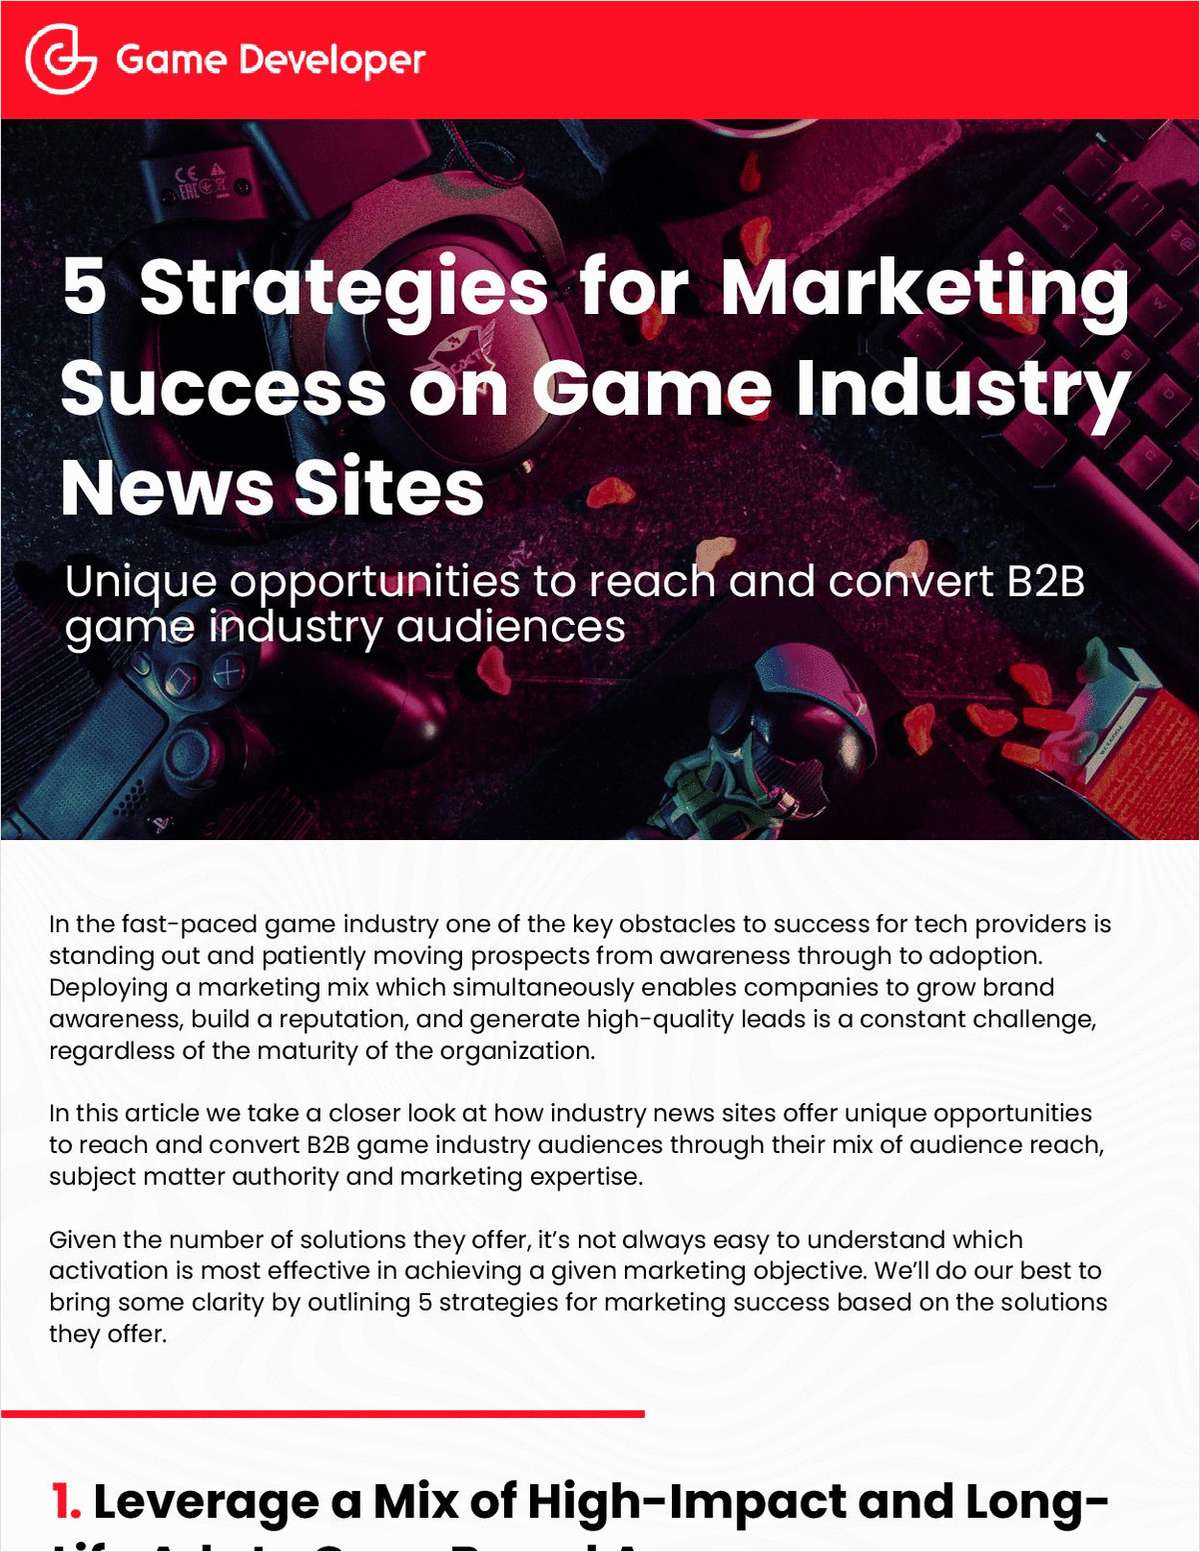 5 Strategies for Marketing Success on Game Industry News Sites